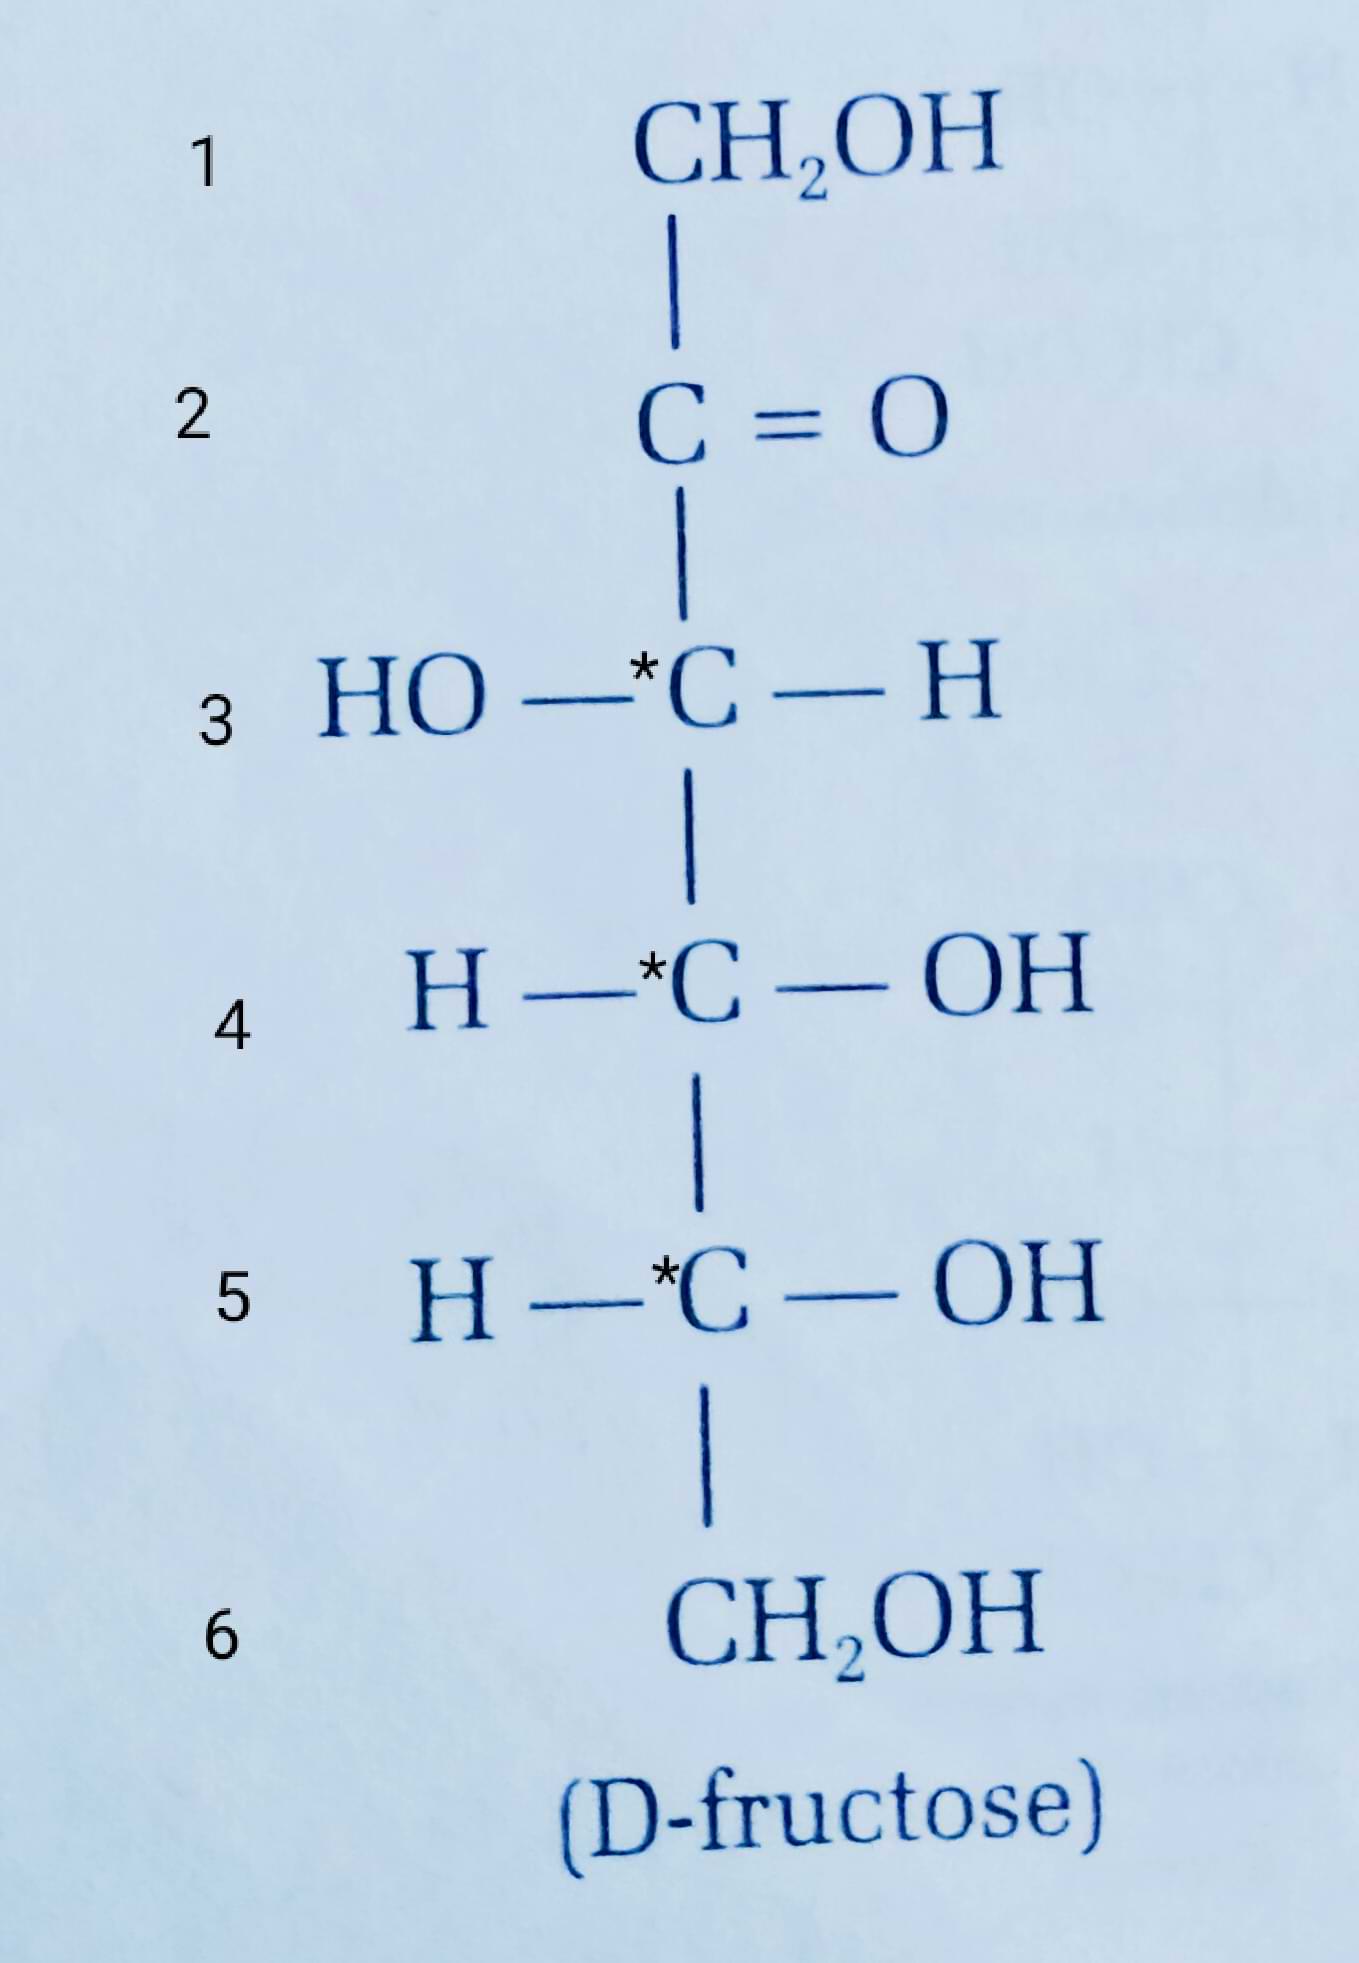 chiral carbon in fructose